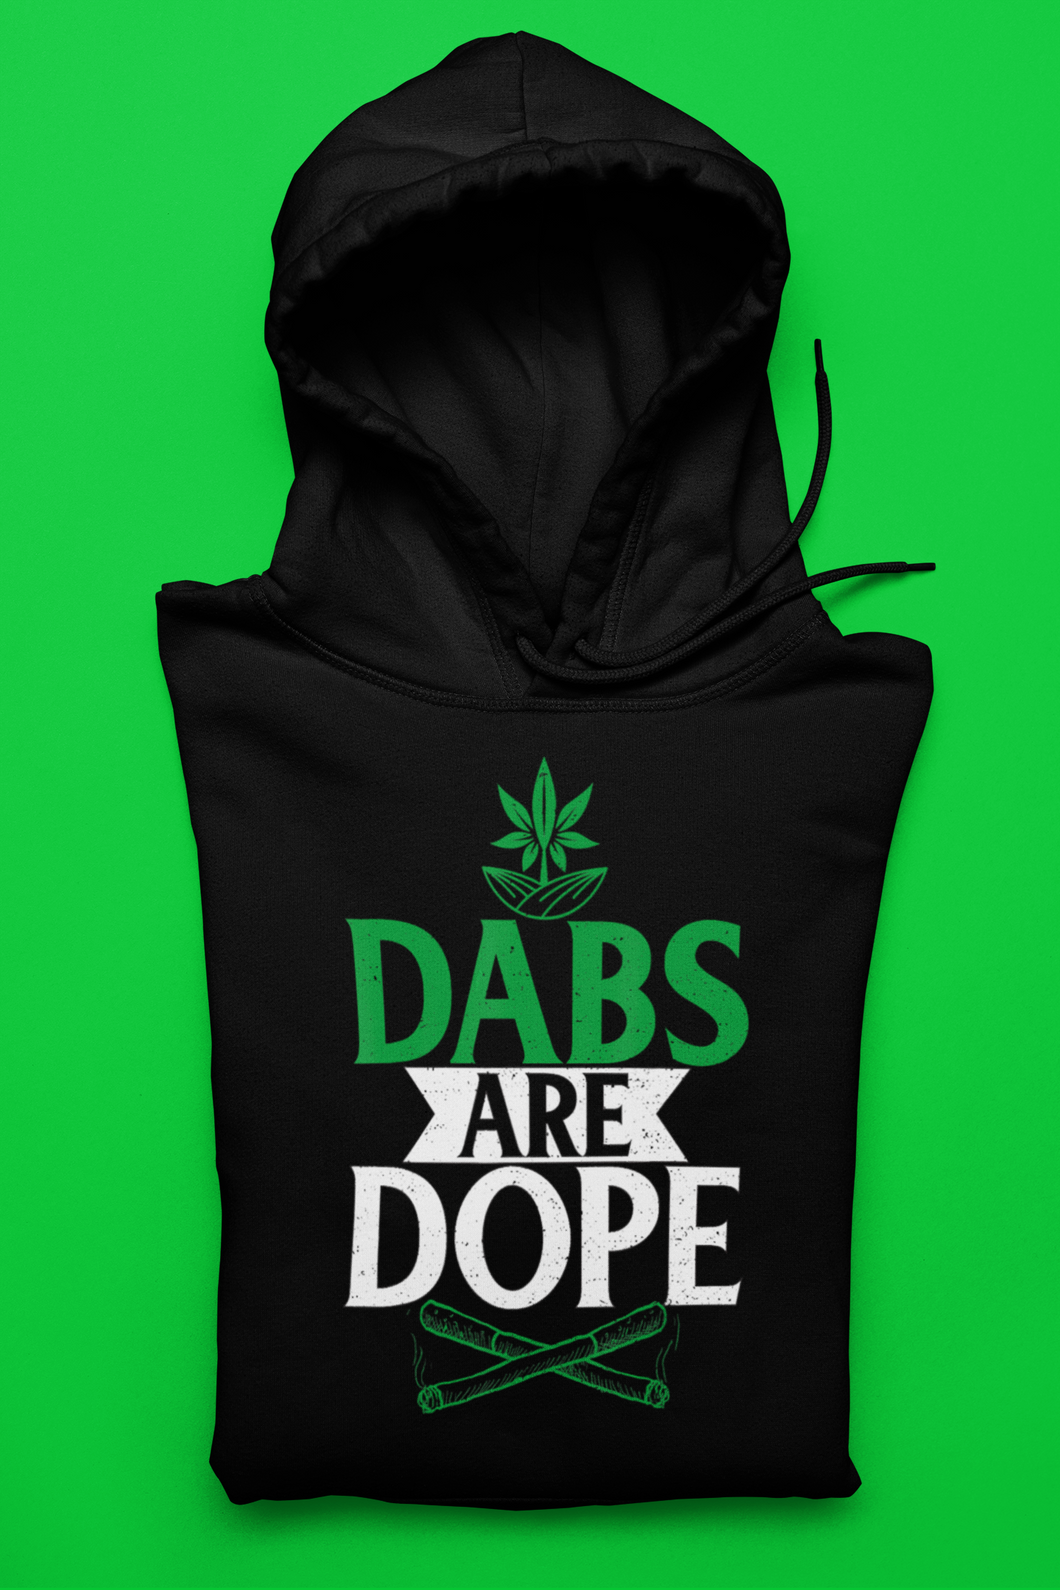 The Dabs Are Dope Shirt/Hoody